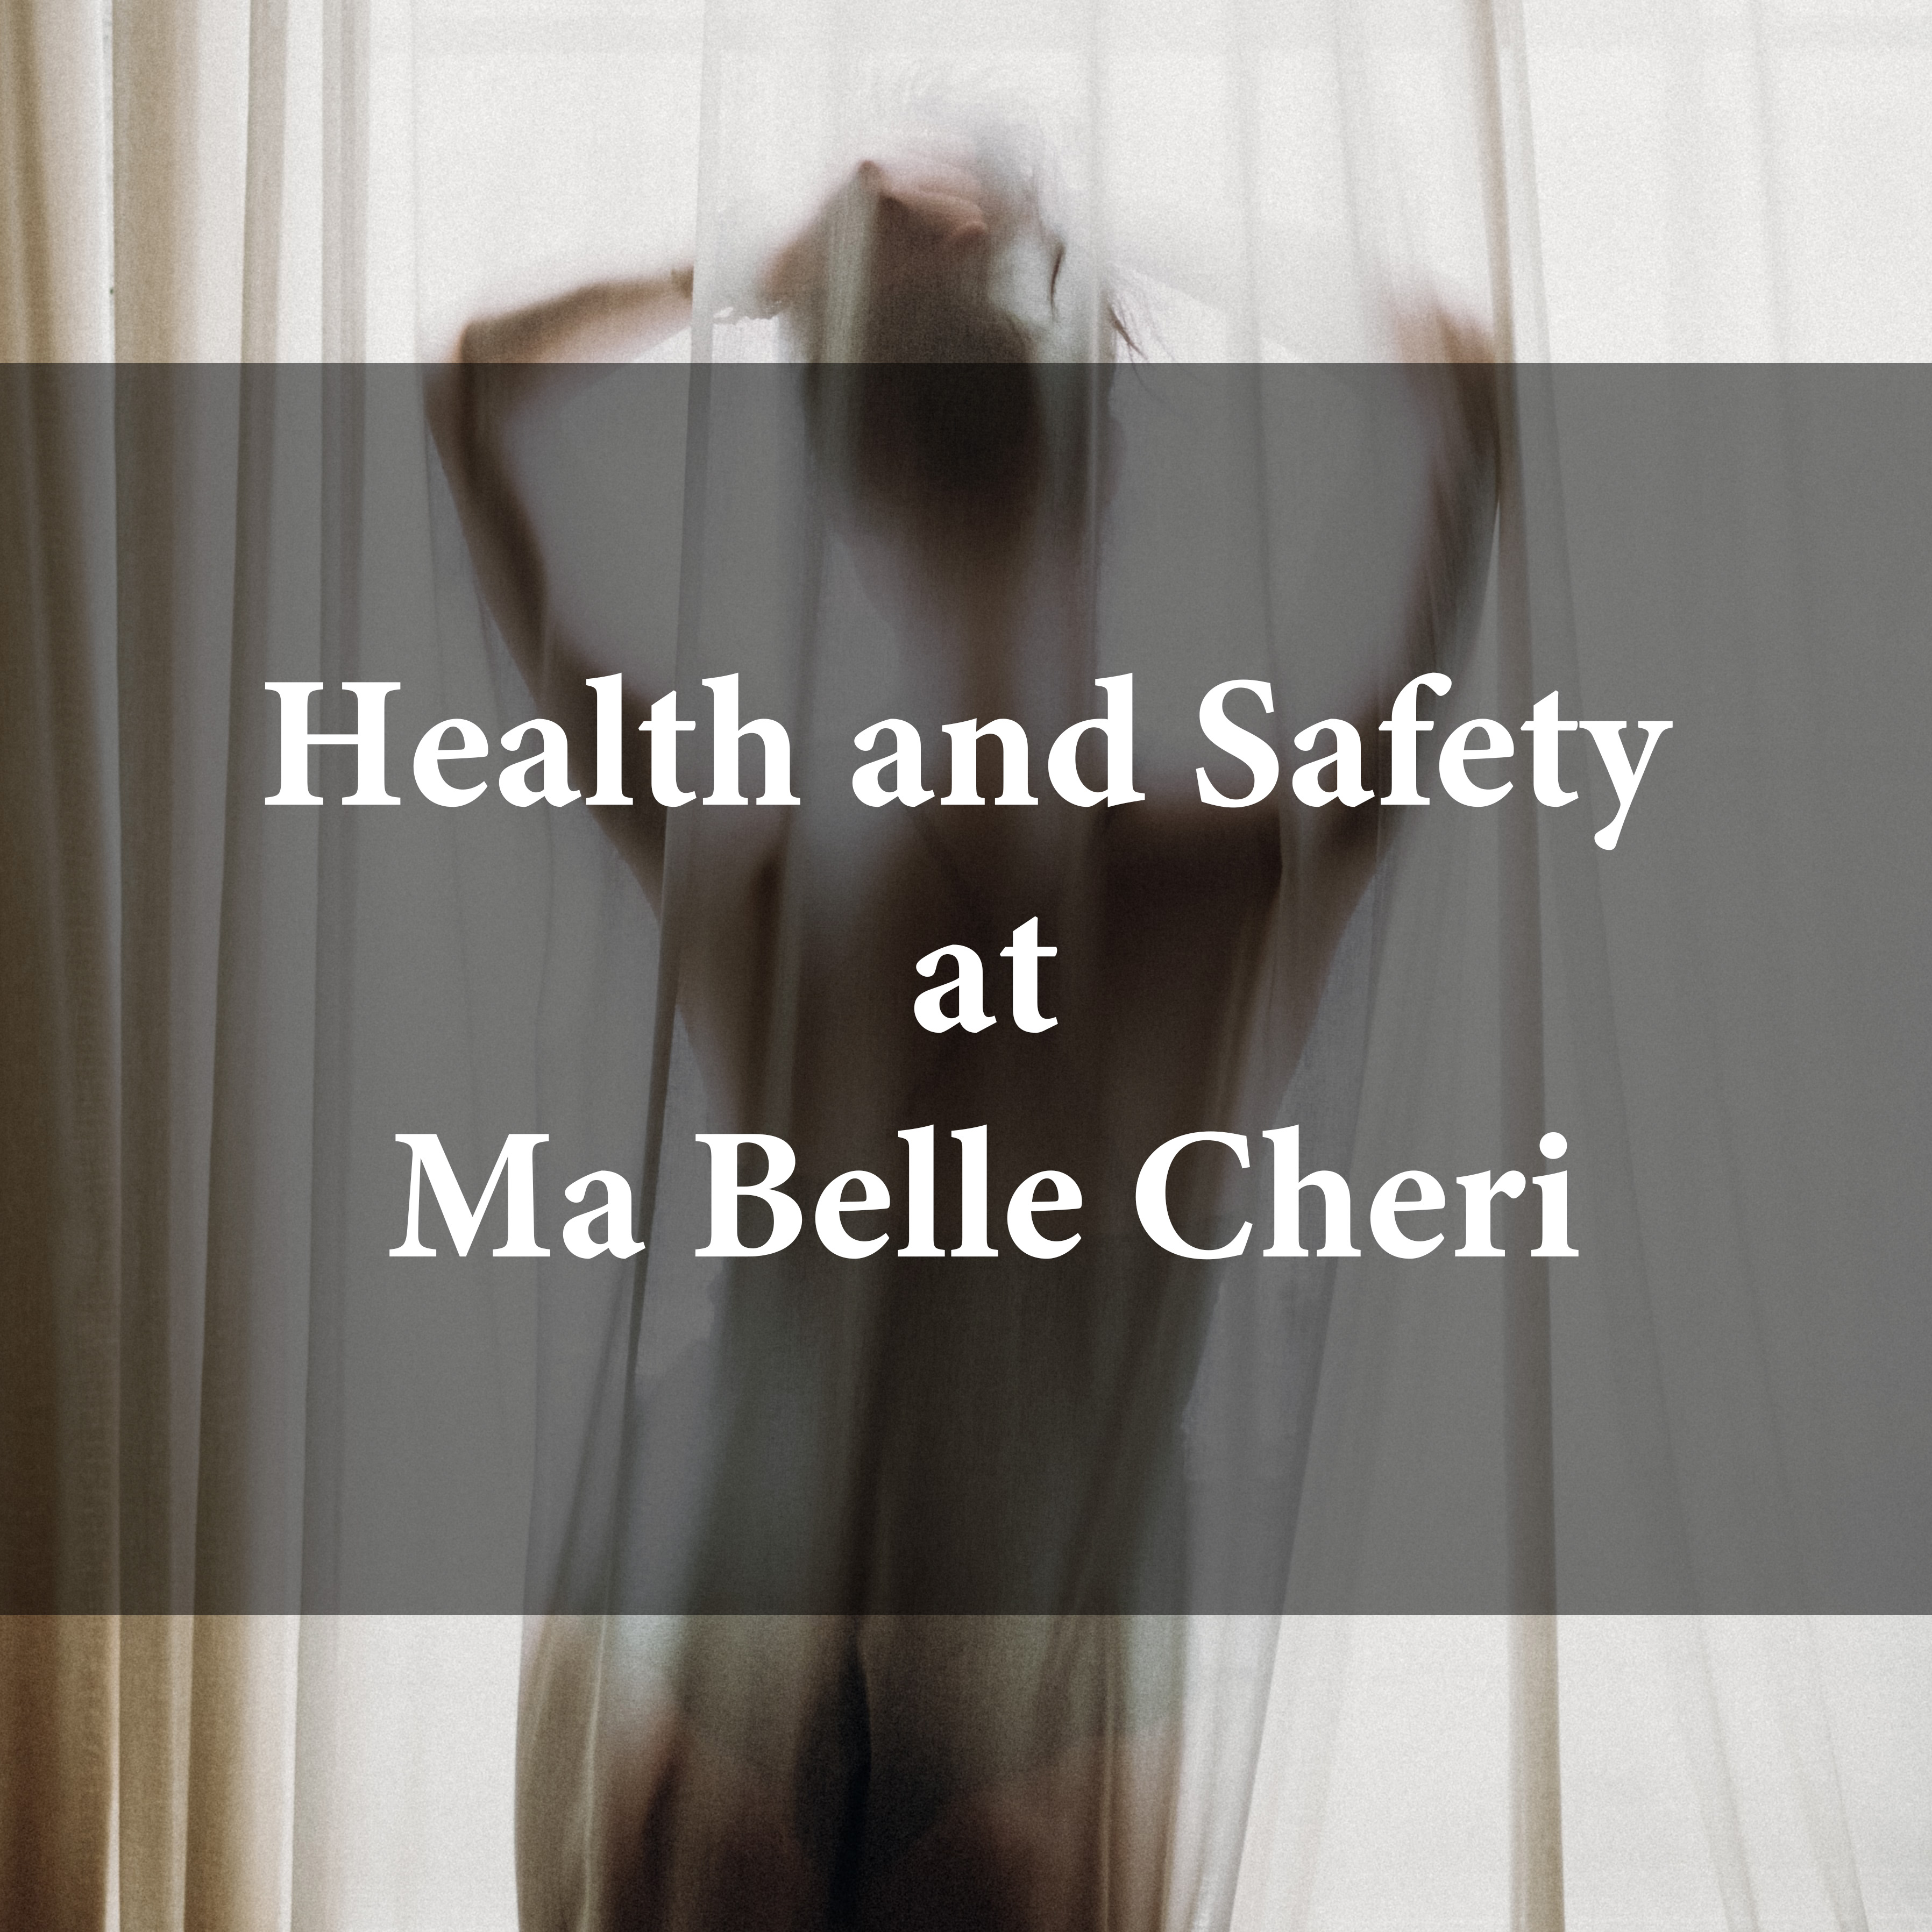 Ma Belle Cheri health and safety guidelines